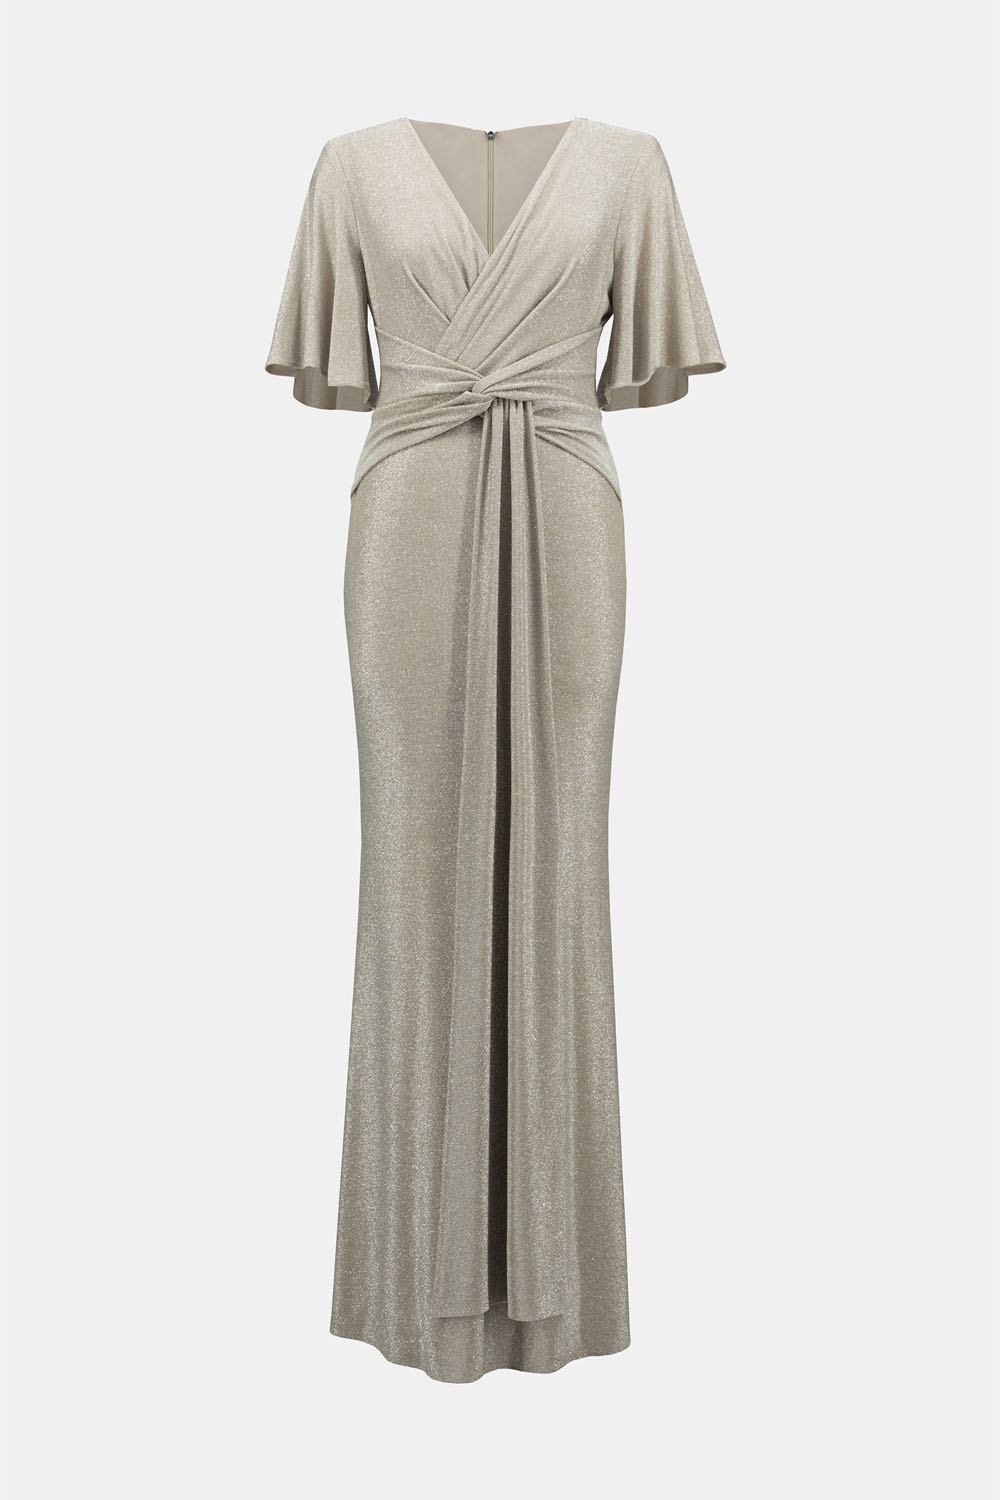 Joseph Ribkoff Champagne Solid Lurex Fit And Flare Maxi Dress Style...